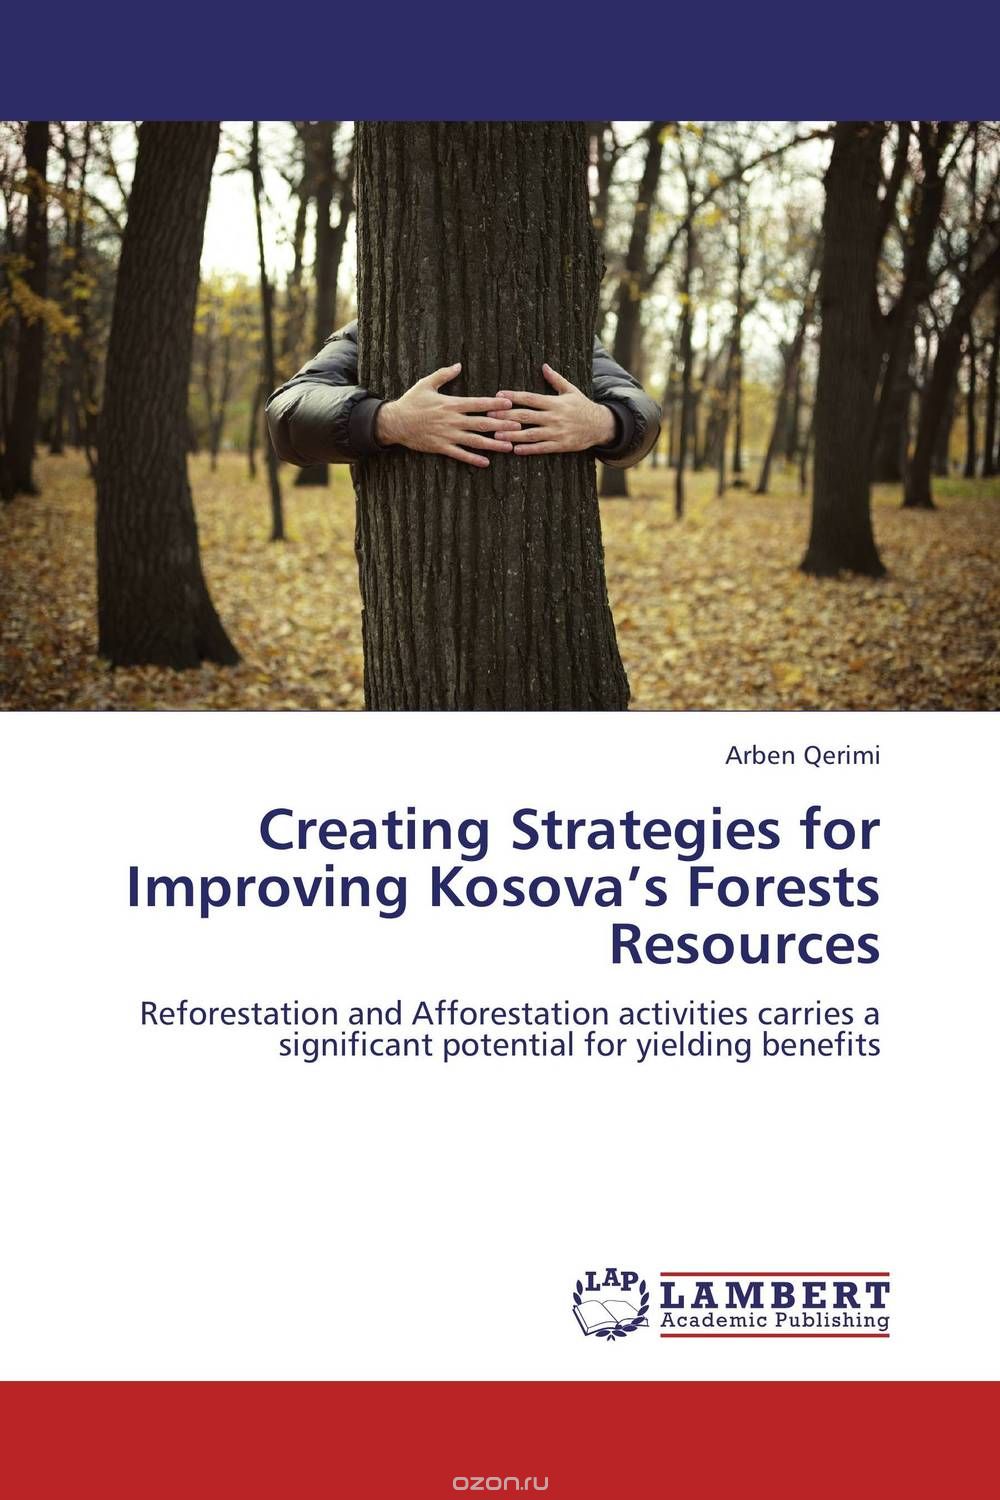 Creating Strategies for Improving Kosova’s Forests Resources